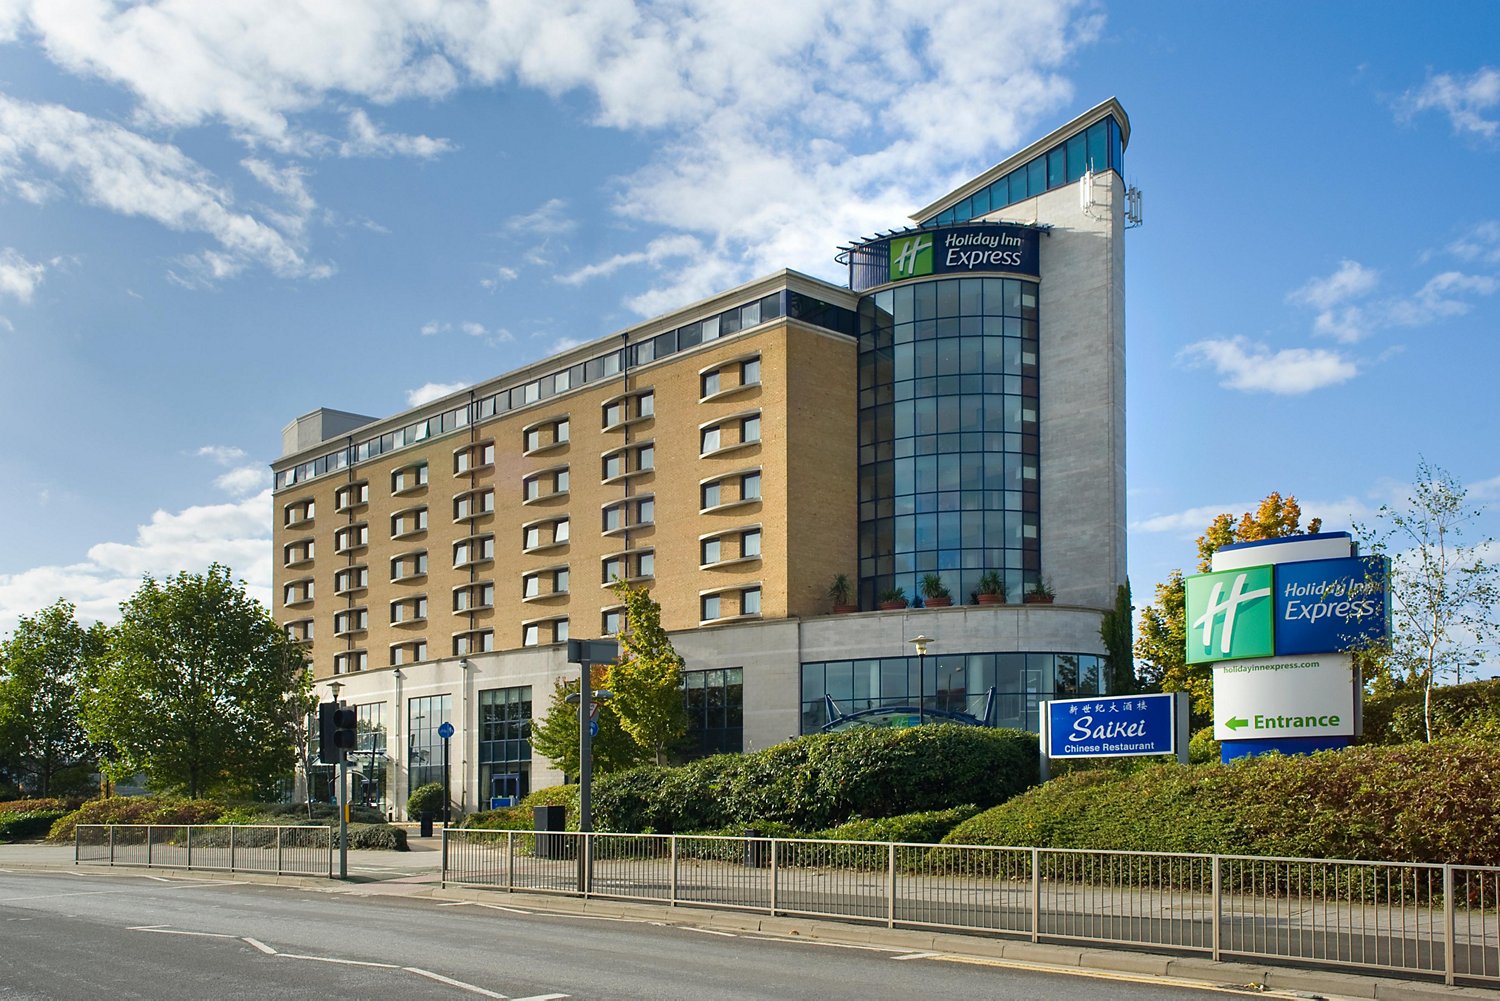 Holiday Inn Express, Greenwich Gallery Image 1